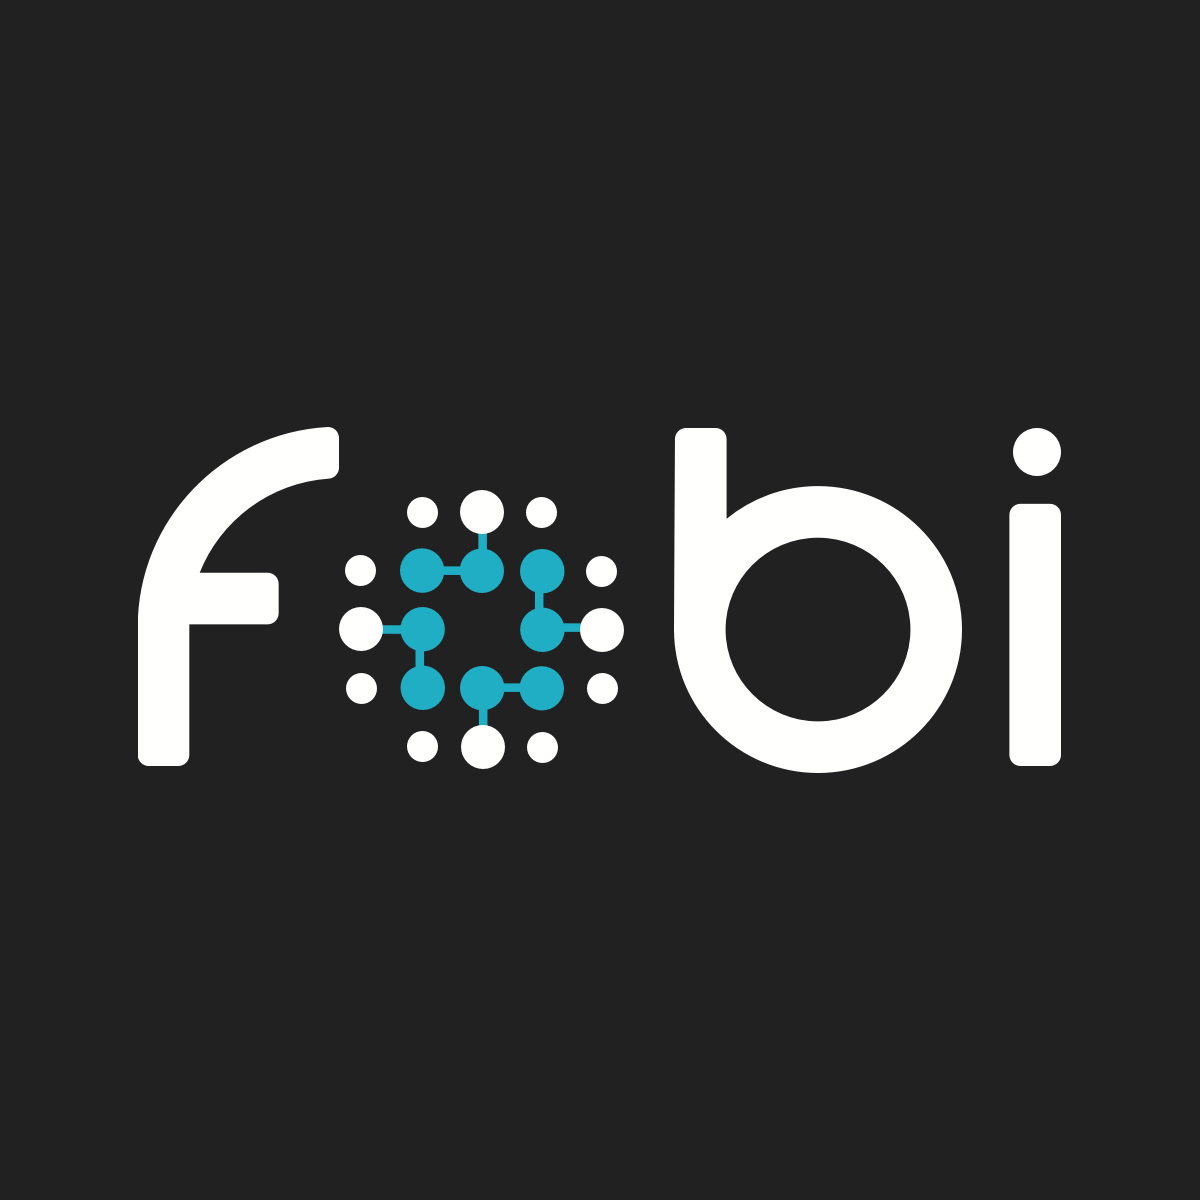 Hire Shopify Experts to integrate Fobi Insights app into a Shopify store